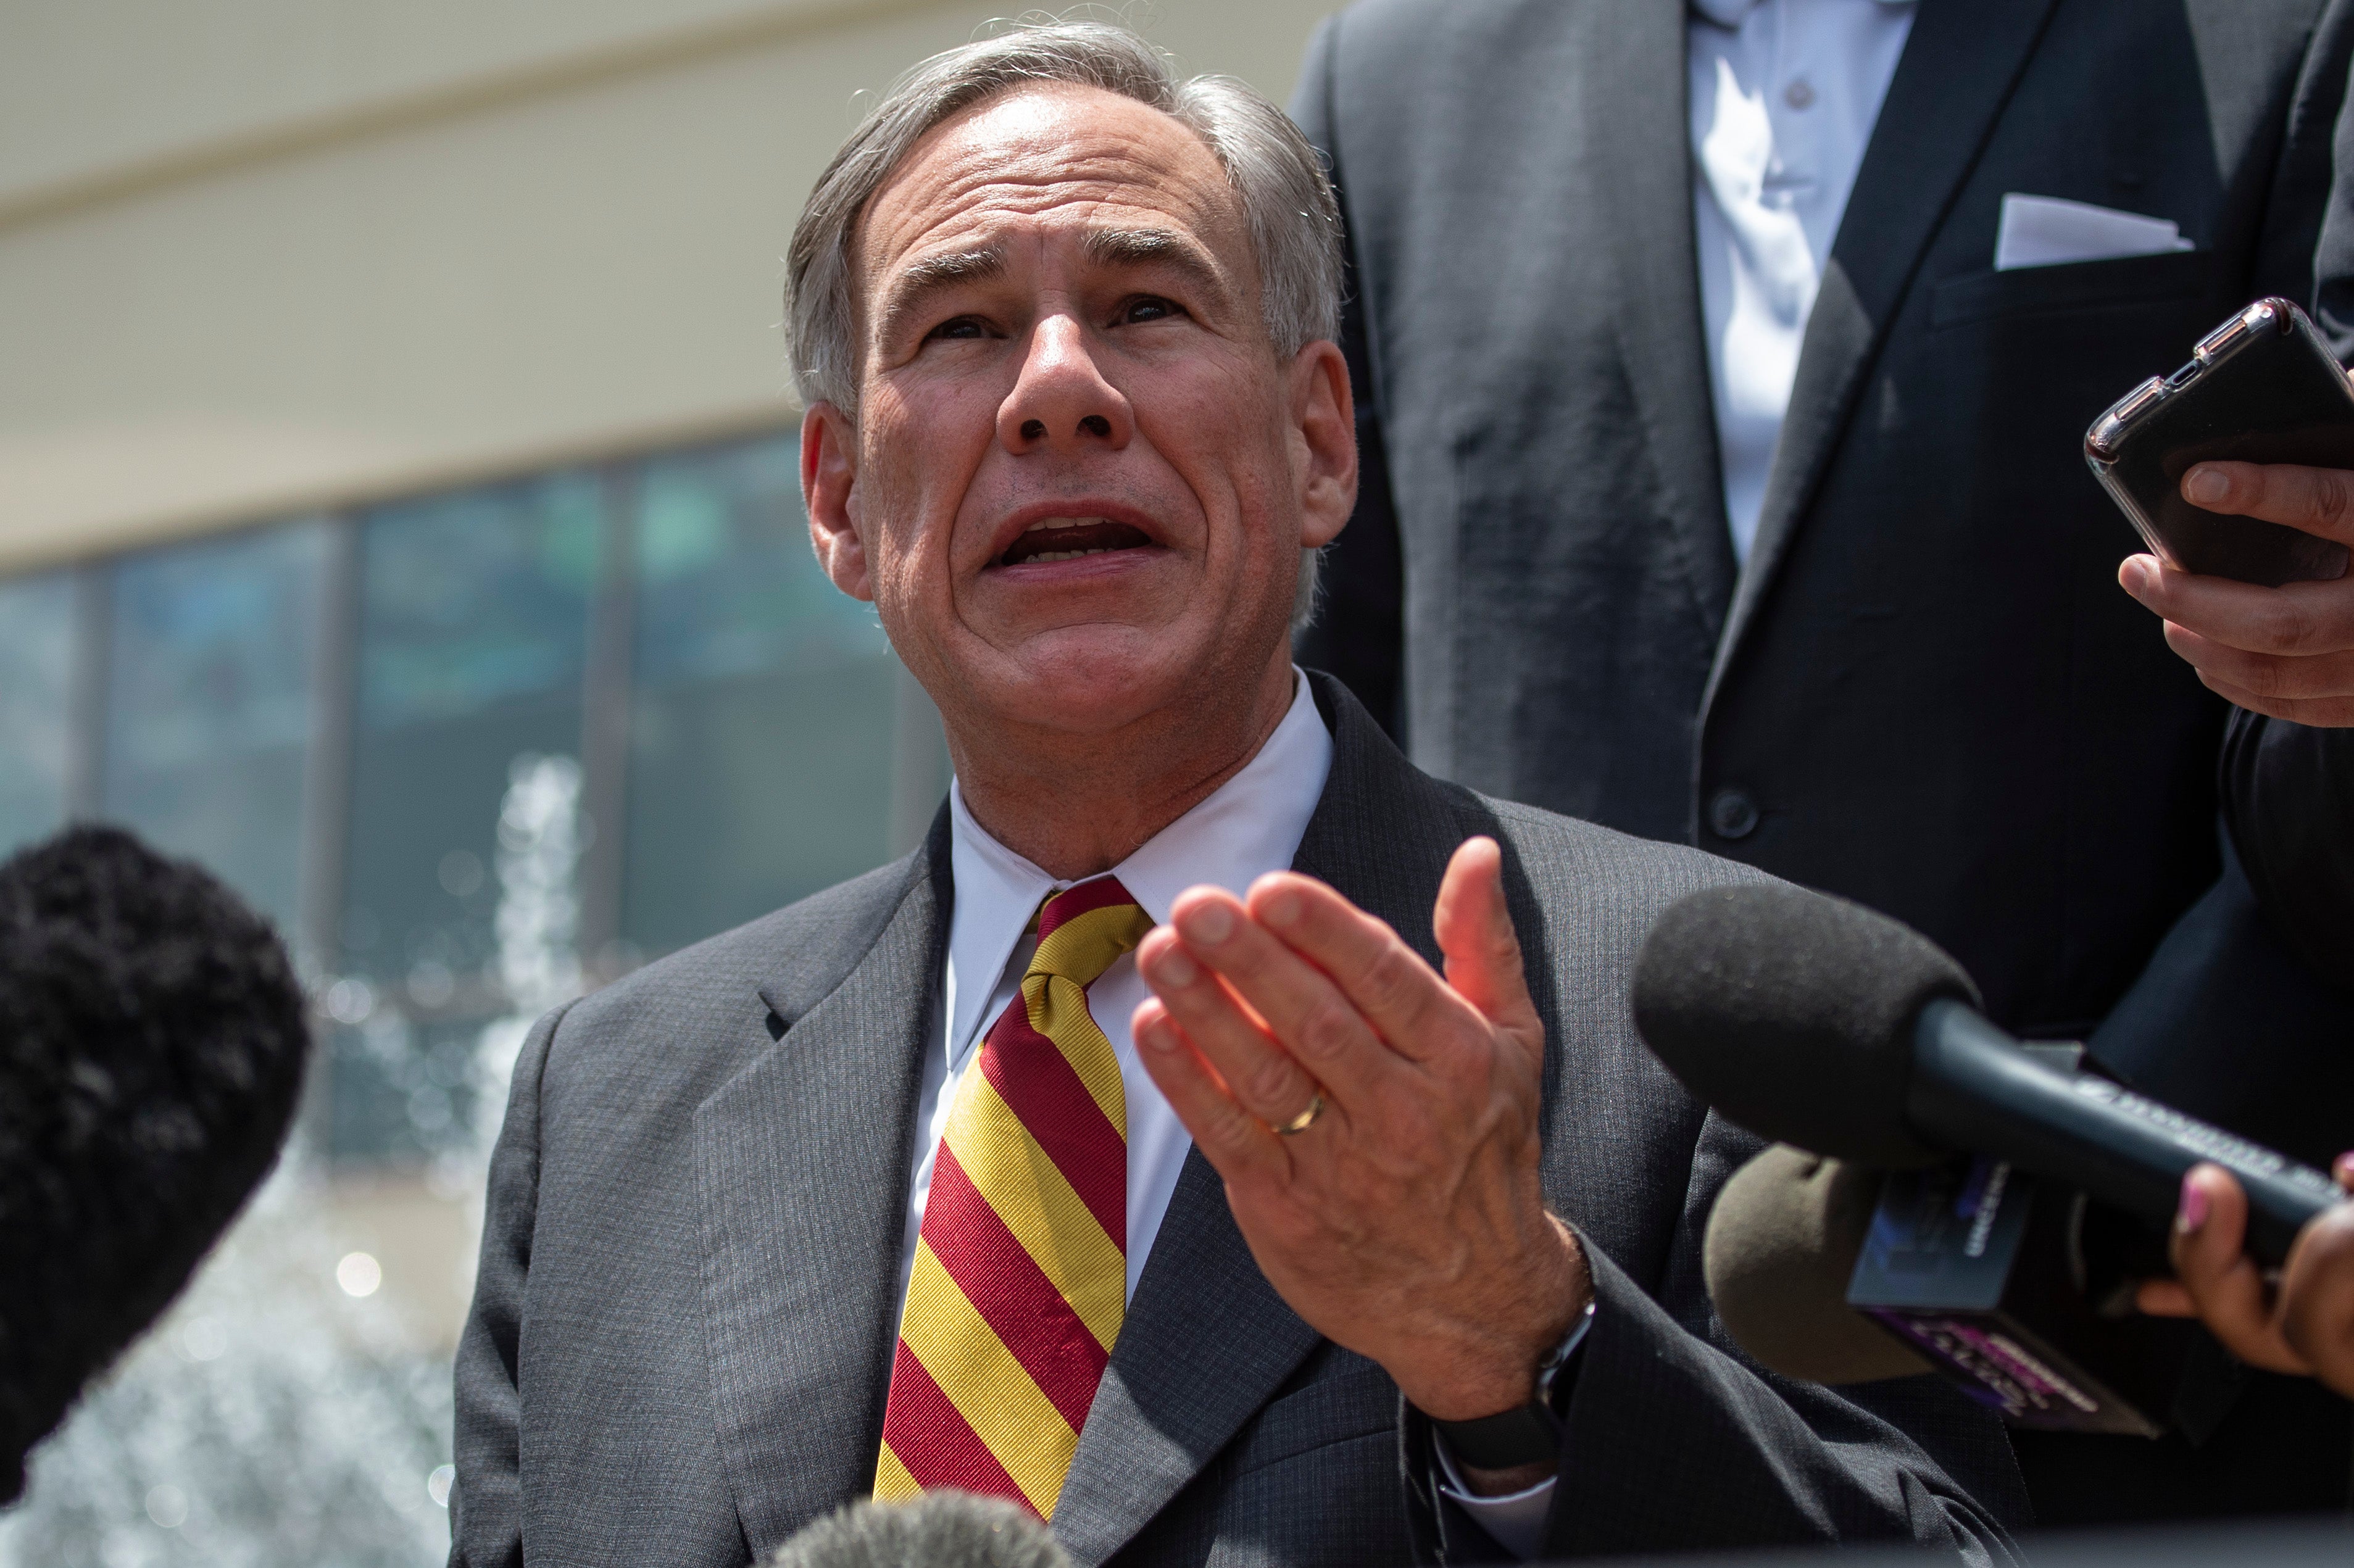 Republican Gregg Abbott displayed a shocking lack of knowledge about women’s bodies